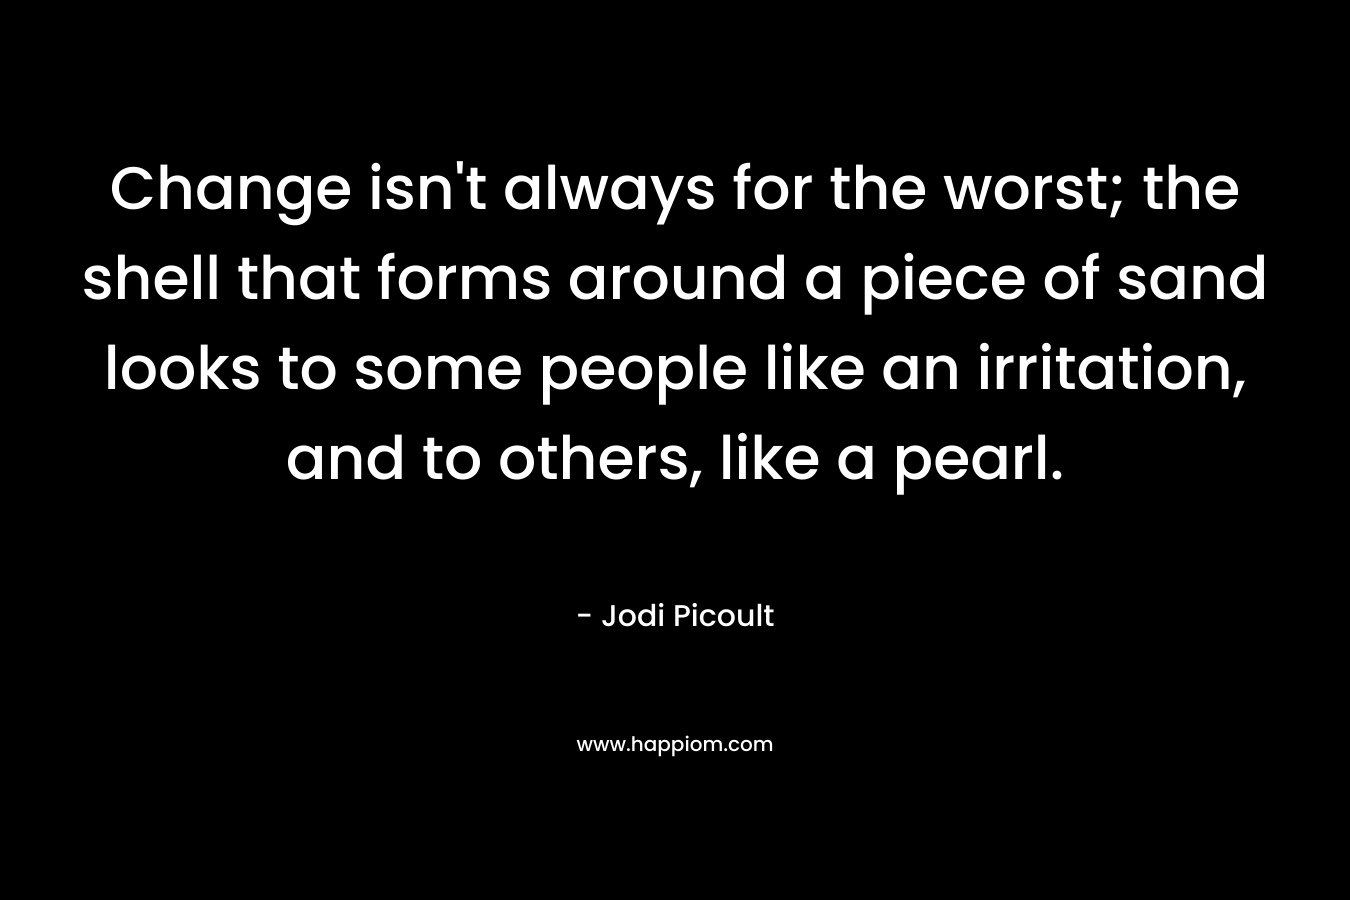 Change isn’t always for the worst; the shell that forms around a piece of sand looks to some people like an irritation, and to others, like a pearl. – Jodi Picoult